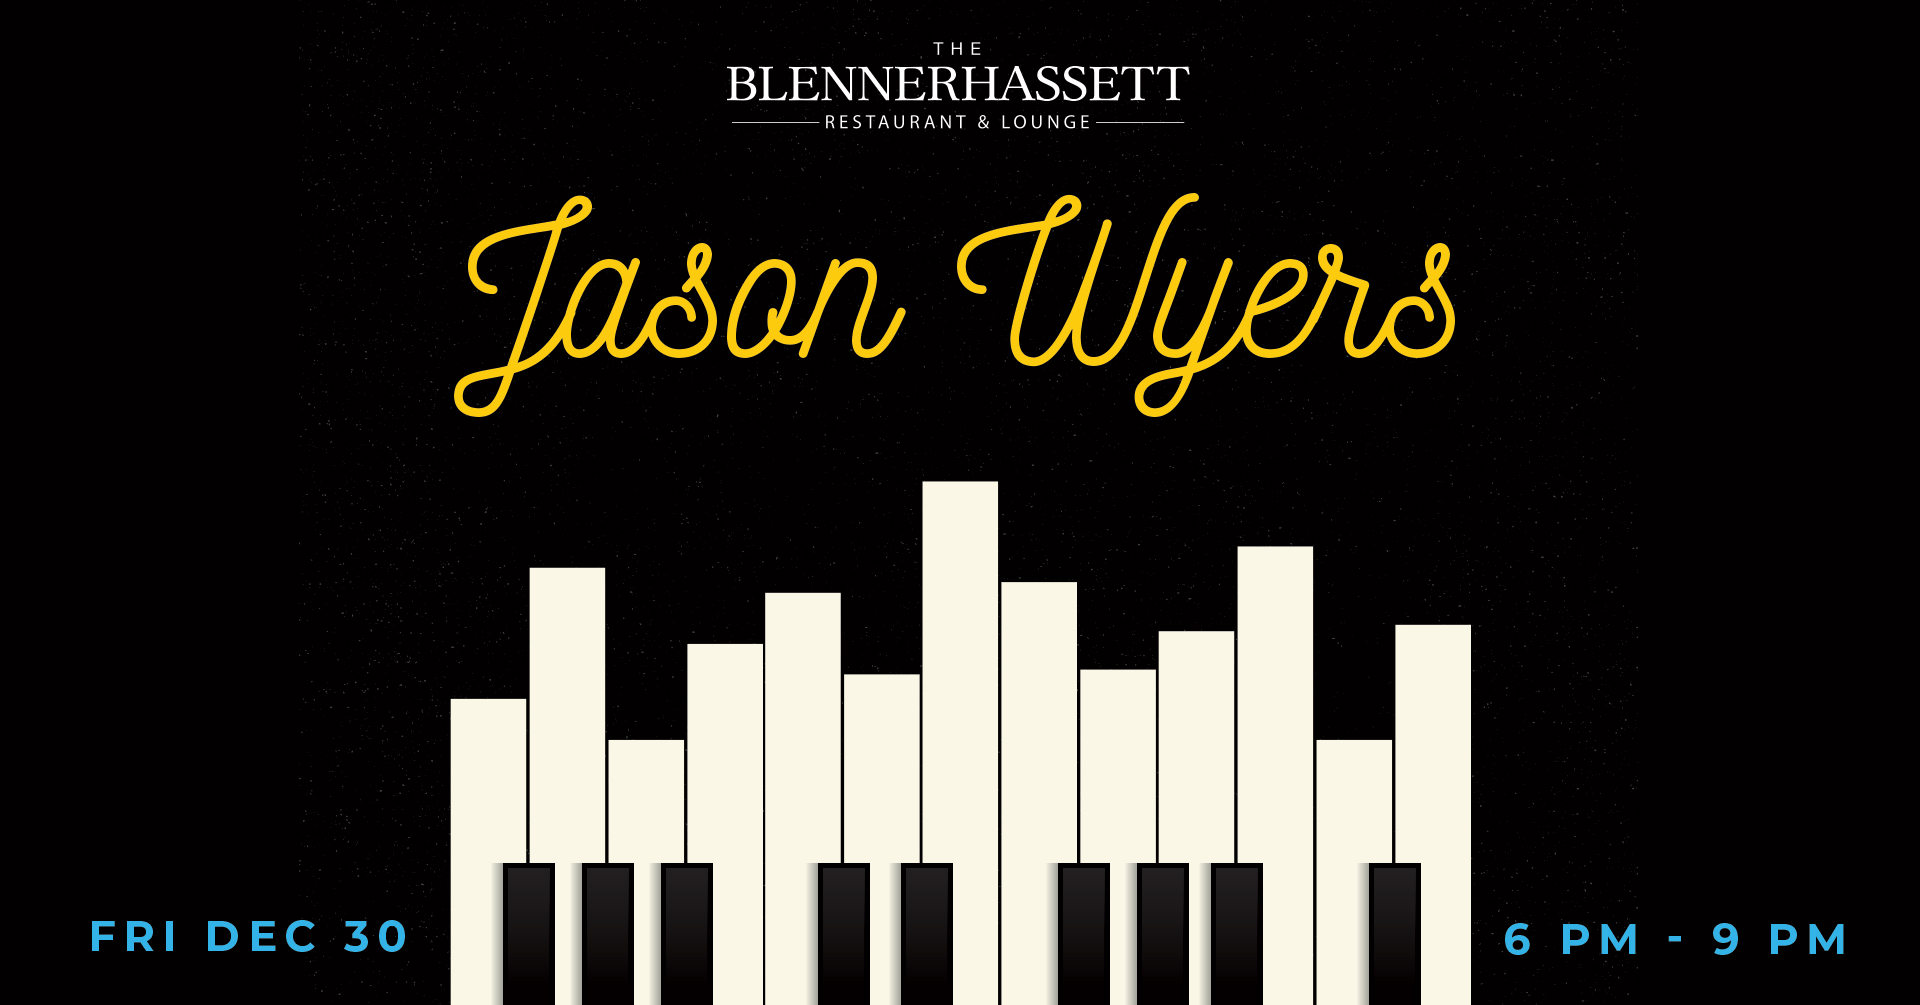 Jason Wyers plays Piano Dinner at The Blennerhassett Restaurant and Lounge on Friday, December 30th